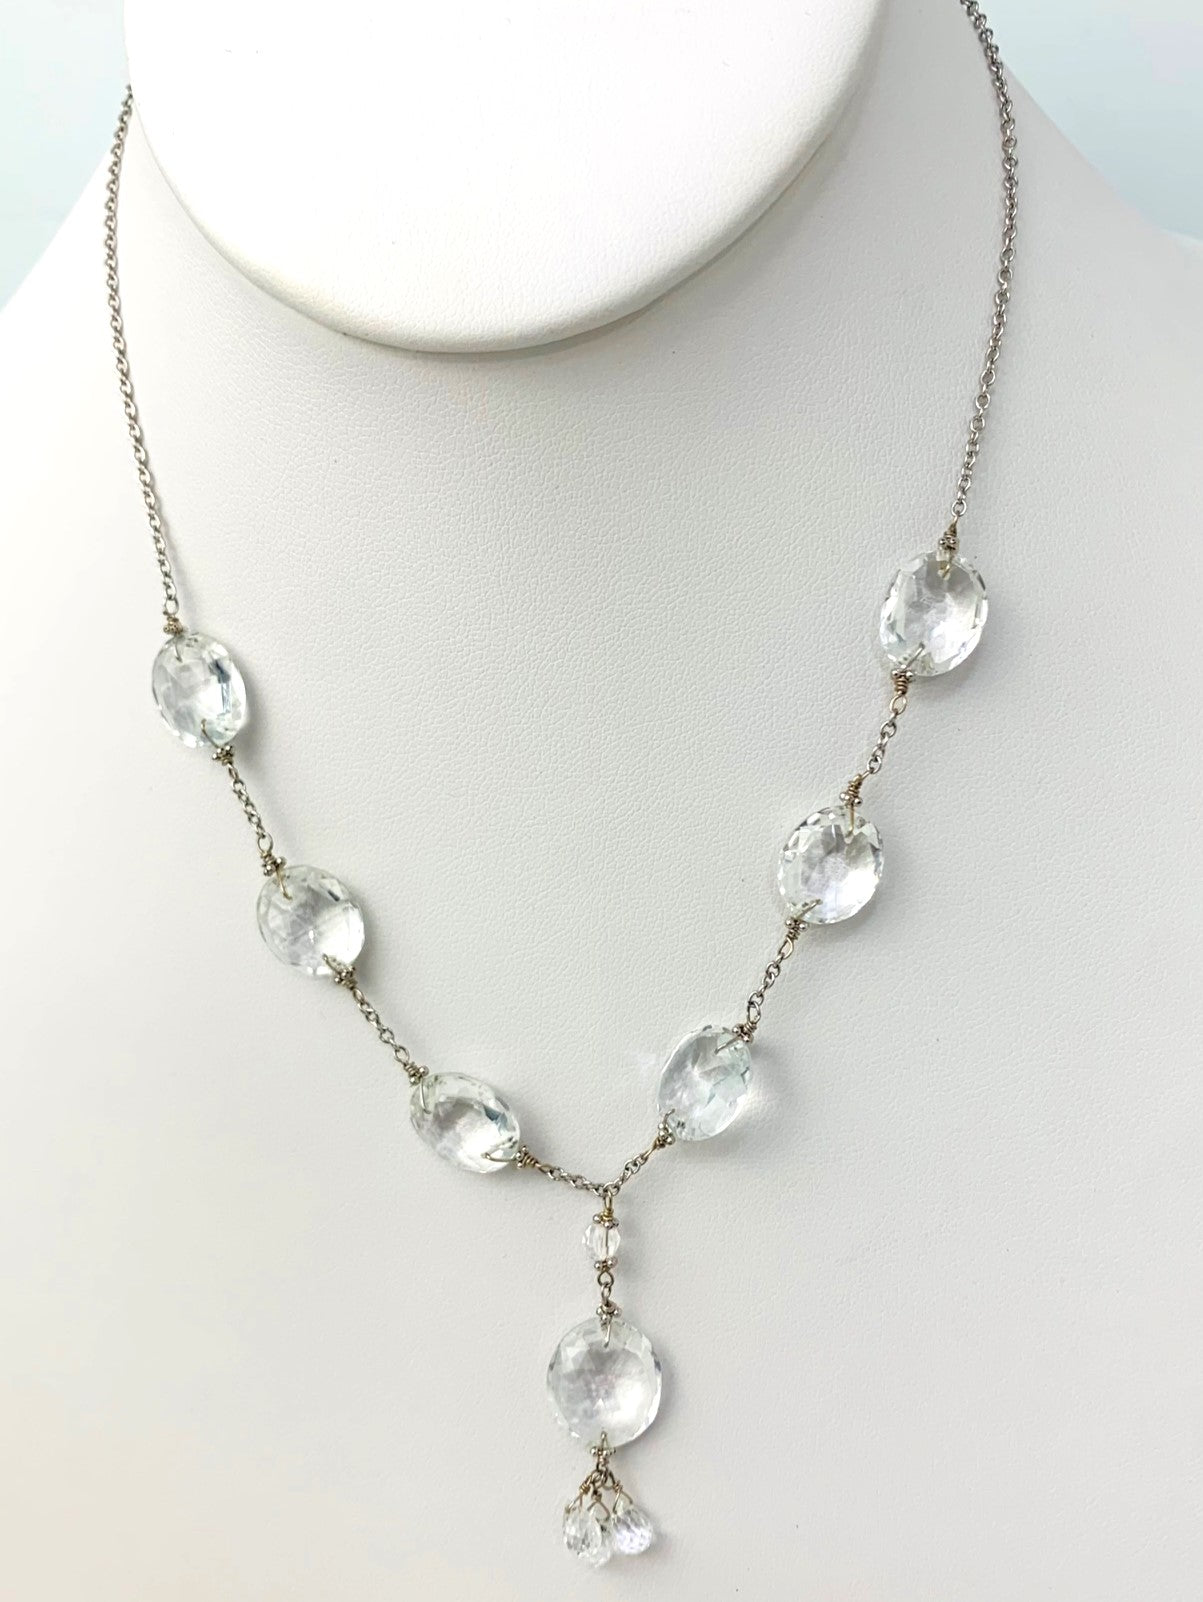 Clearance Sale! - 16-17" Crystal Quartz Station Necklace With Oval Checkerboard And 3 Briolette Tassel Drop in 14KW - NCK-368-TASTNCGM14W-CRY-17